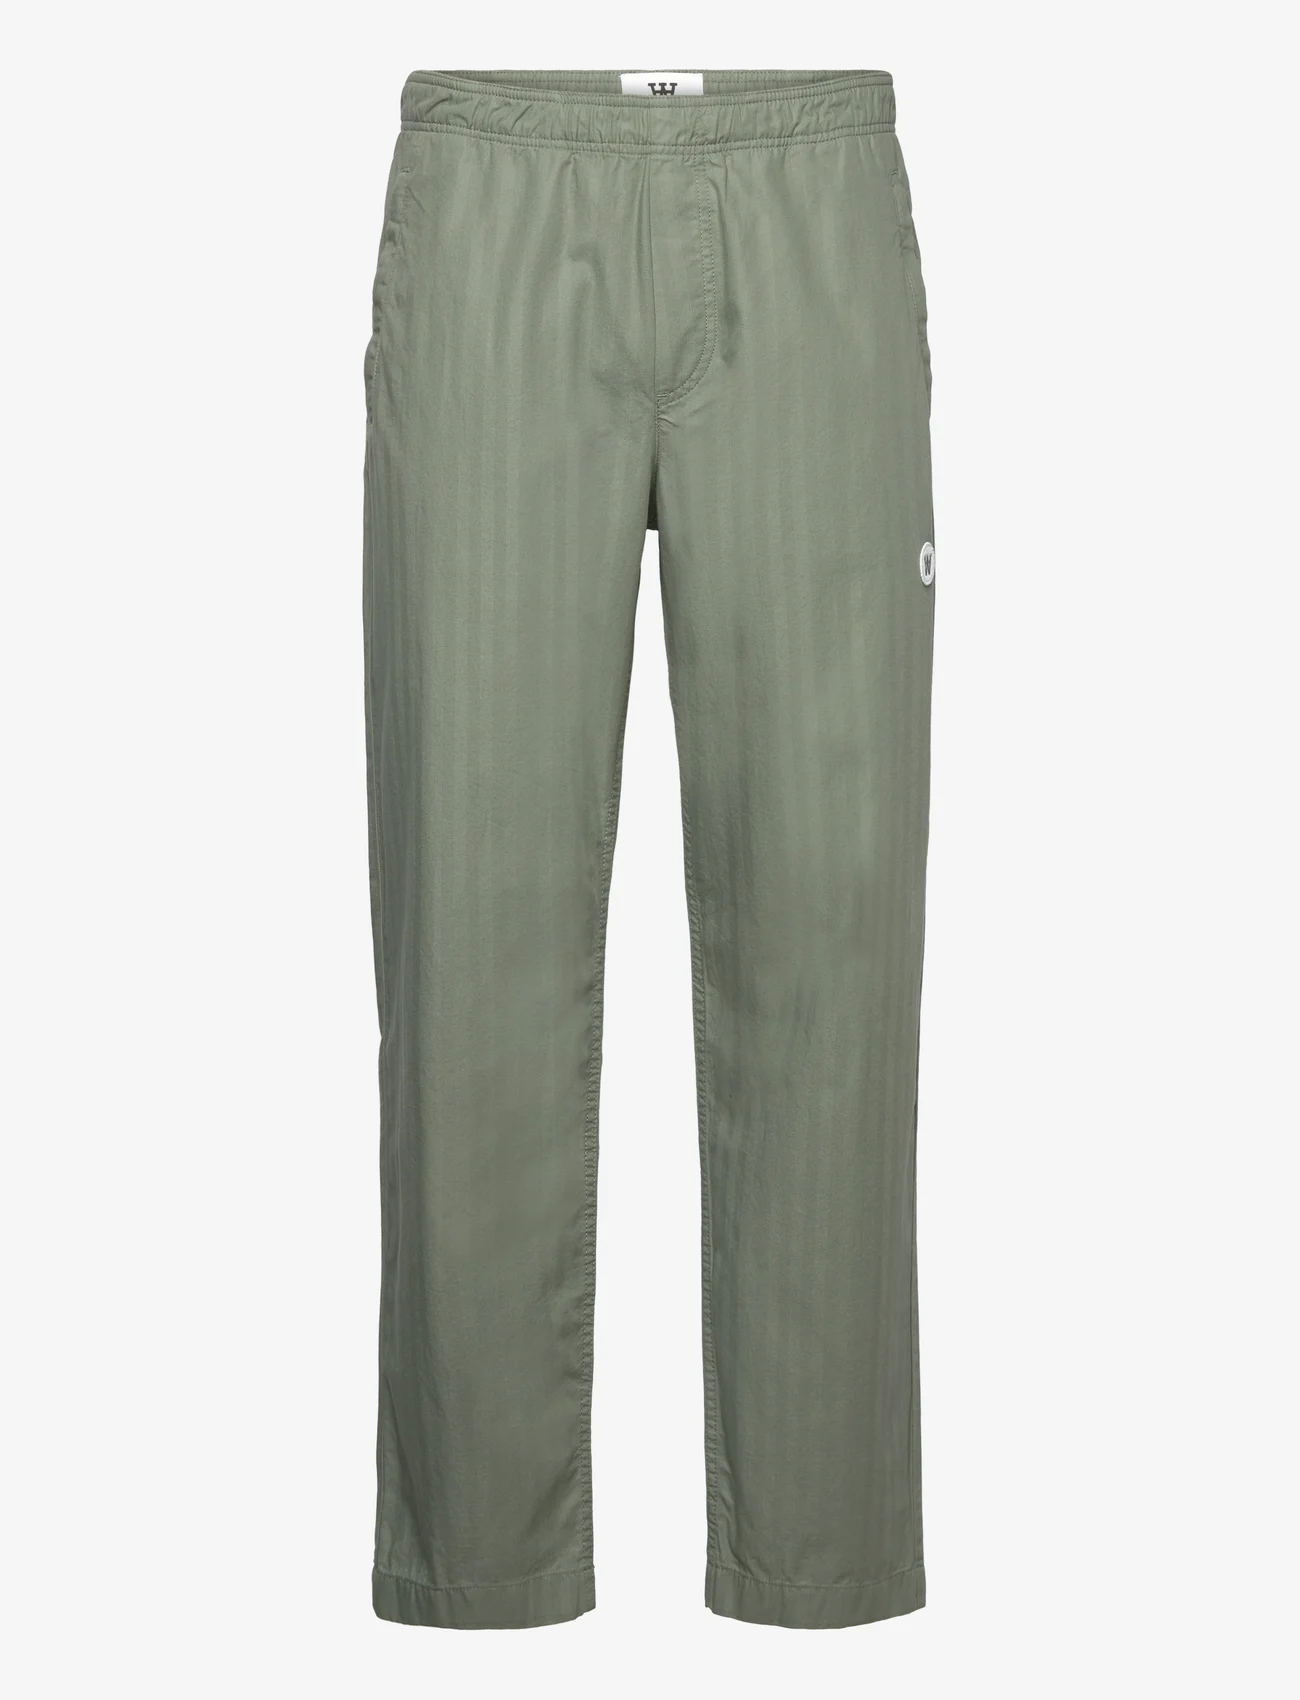 Double A by Wood Wood - Lee herringbone trousers - casual trousers - olive - 0